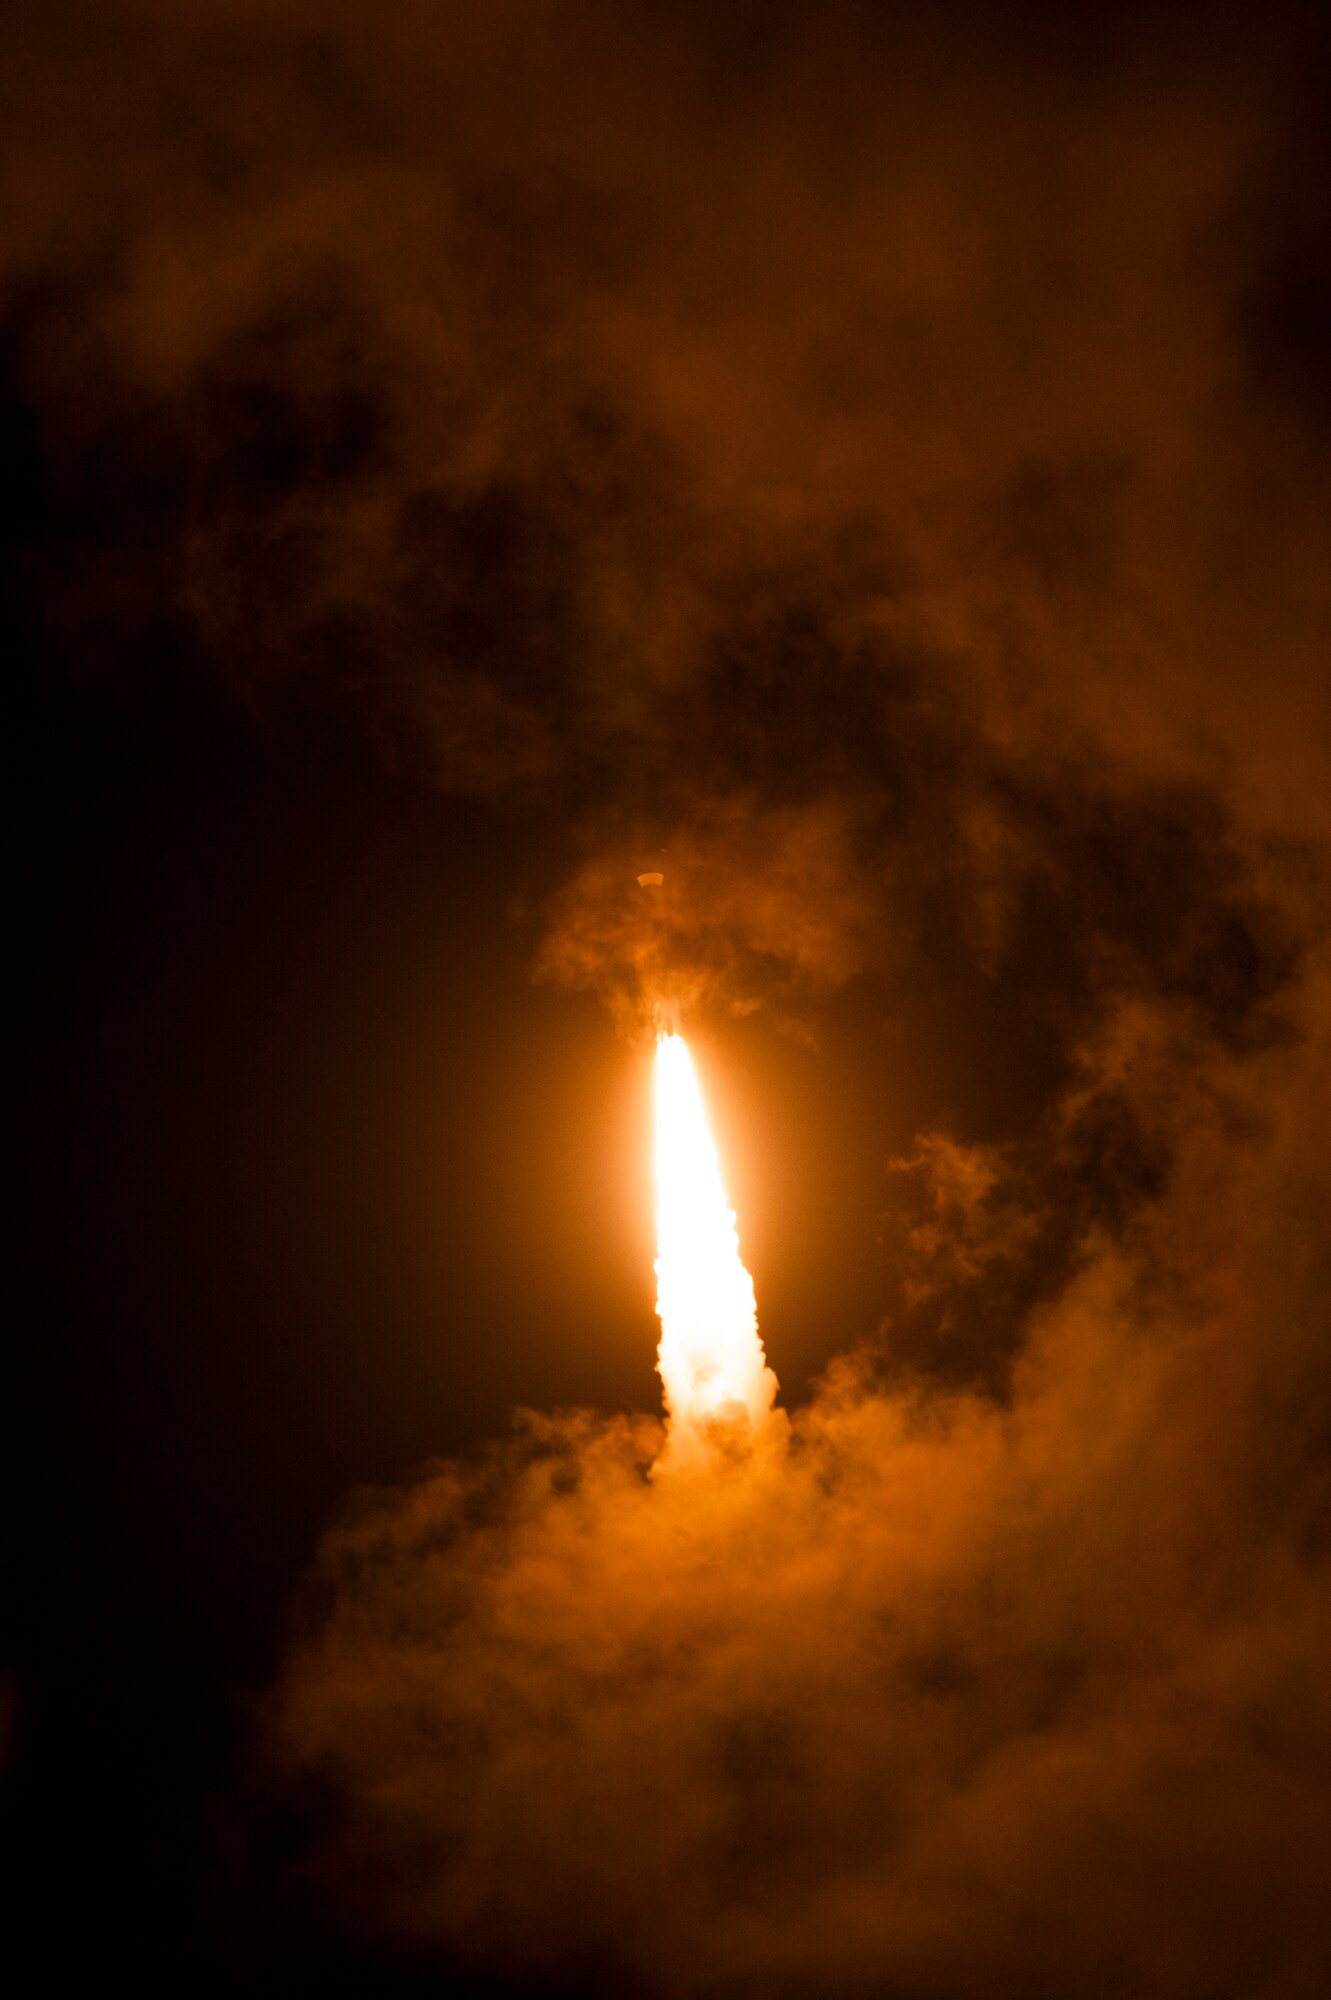 A United Launch Alliance Atlas V rocket carrying a National Reconnaissance Office payload lights the night sky during its launch, Dec. 12, 2014, Vandenberg Air Force Base, Calif. The rocket launched at 7:19 p.m. PDT from Space Launch Complex-3 by Team Vandenberg. (U.S. Air Force photo by Staff Sgt. Jim Araos/Released)